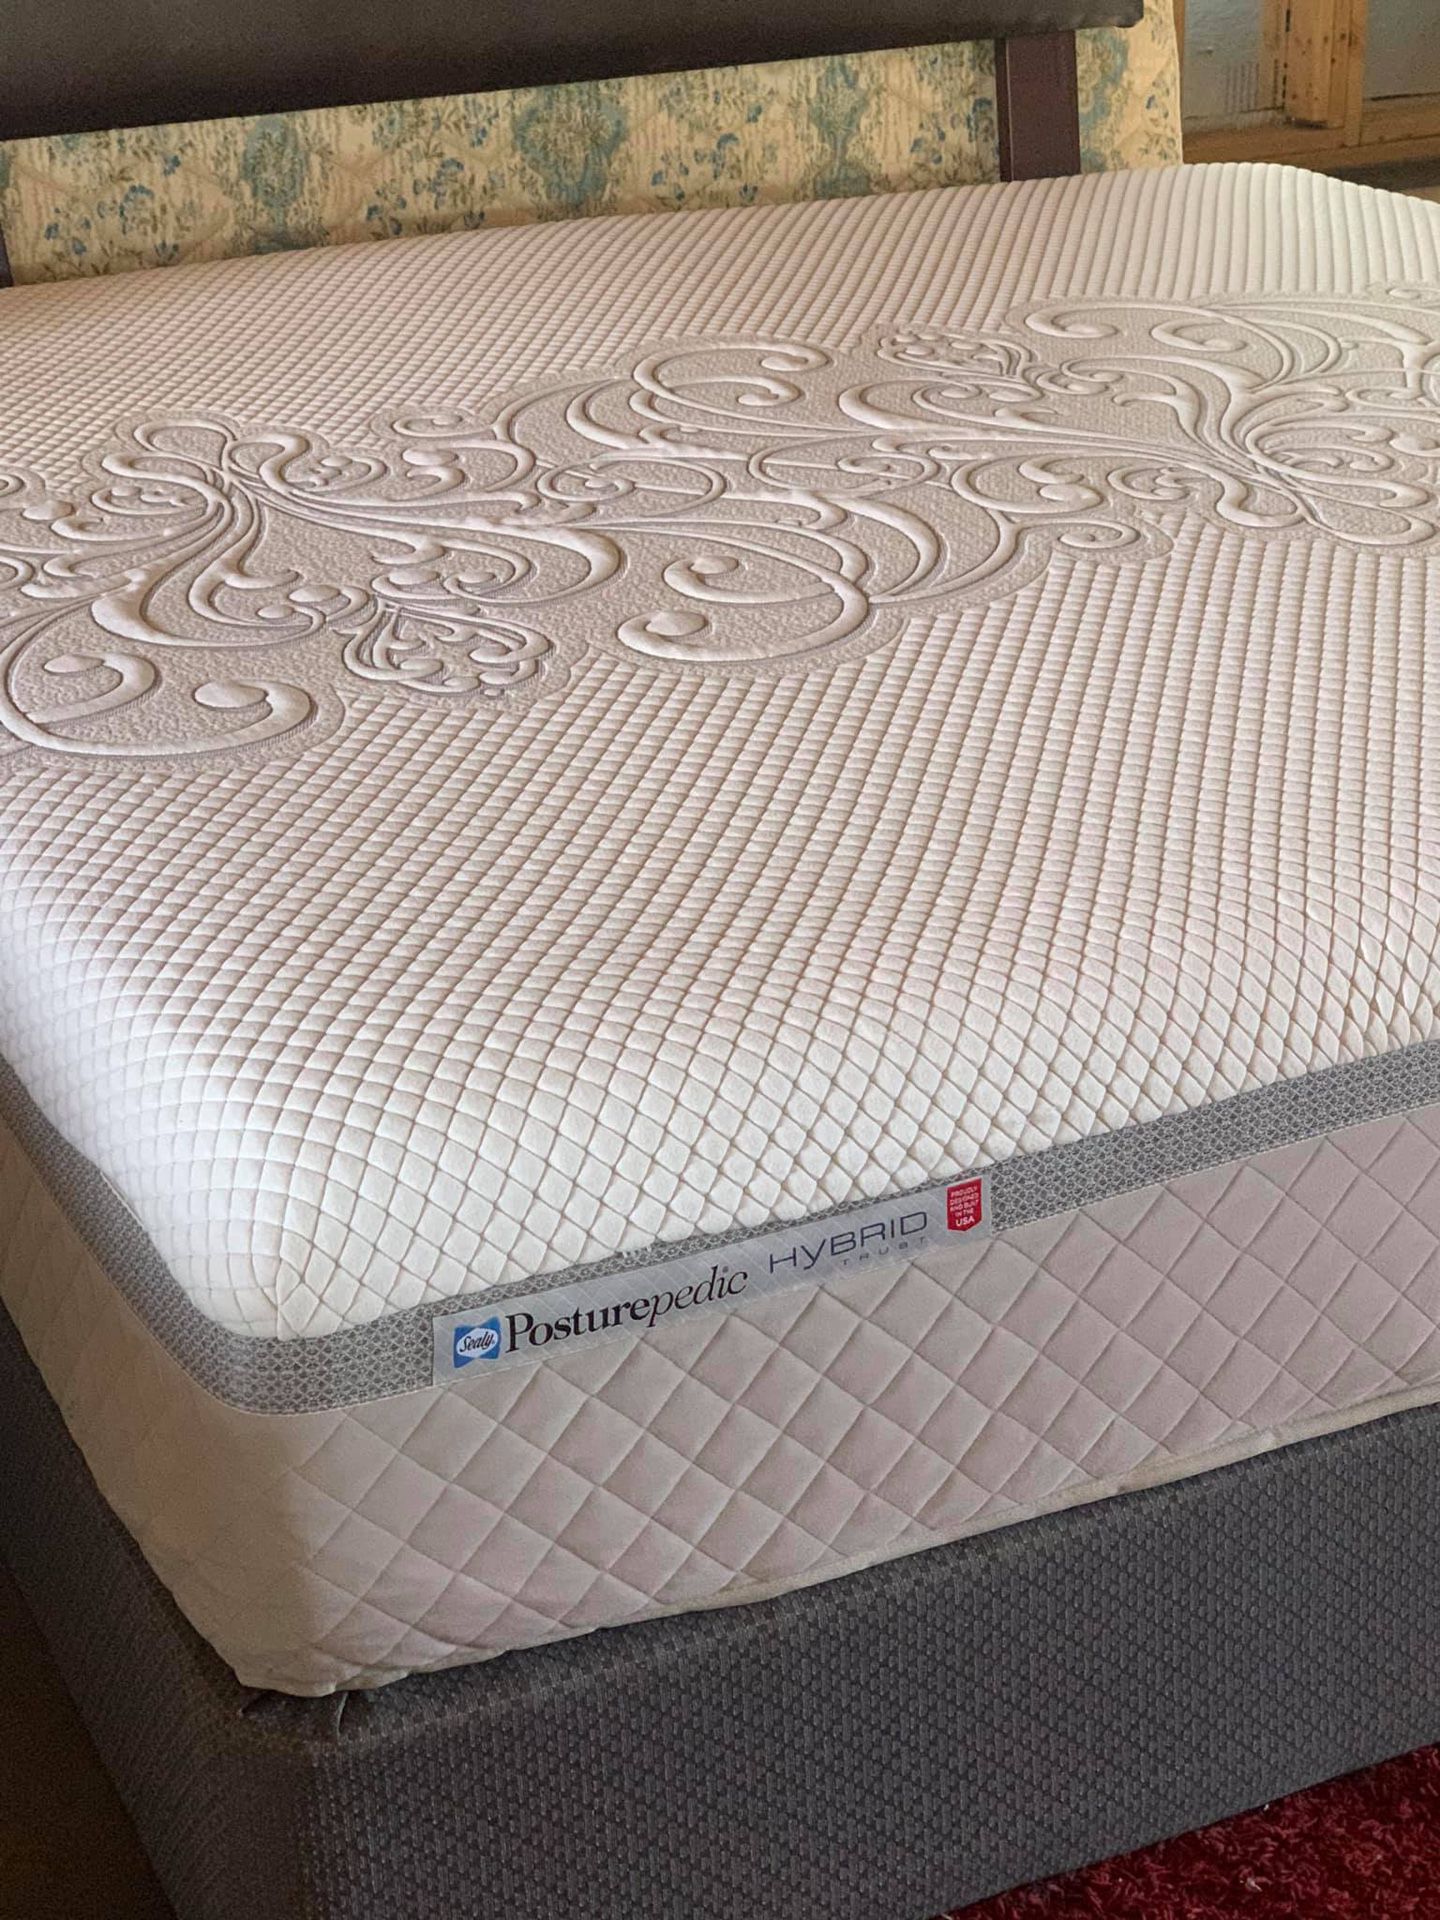 USED KING SIZE MEMORRY FOAM HYBRIDS SEALY POSTUREPEDIC MATTRESS WITH BOX SPRING